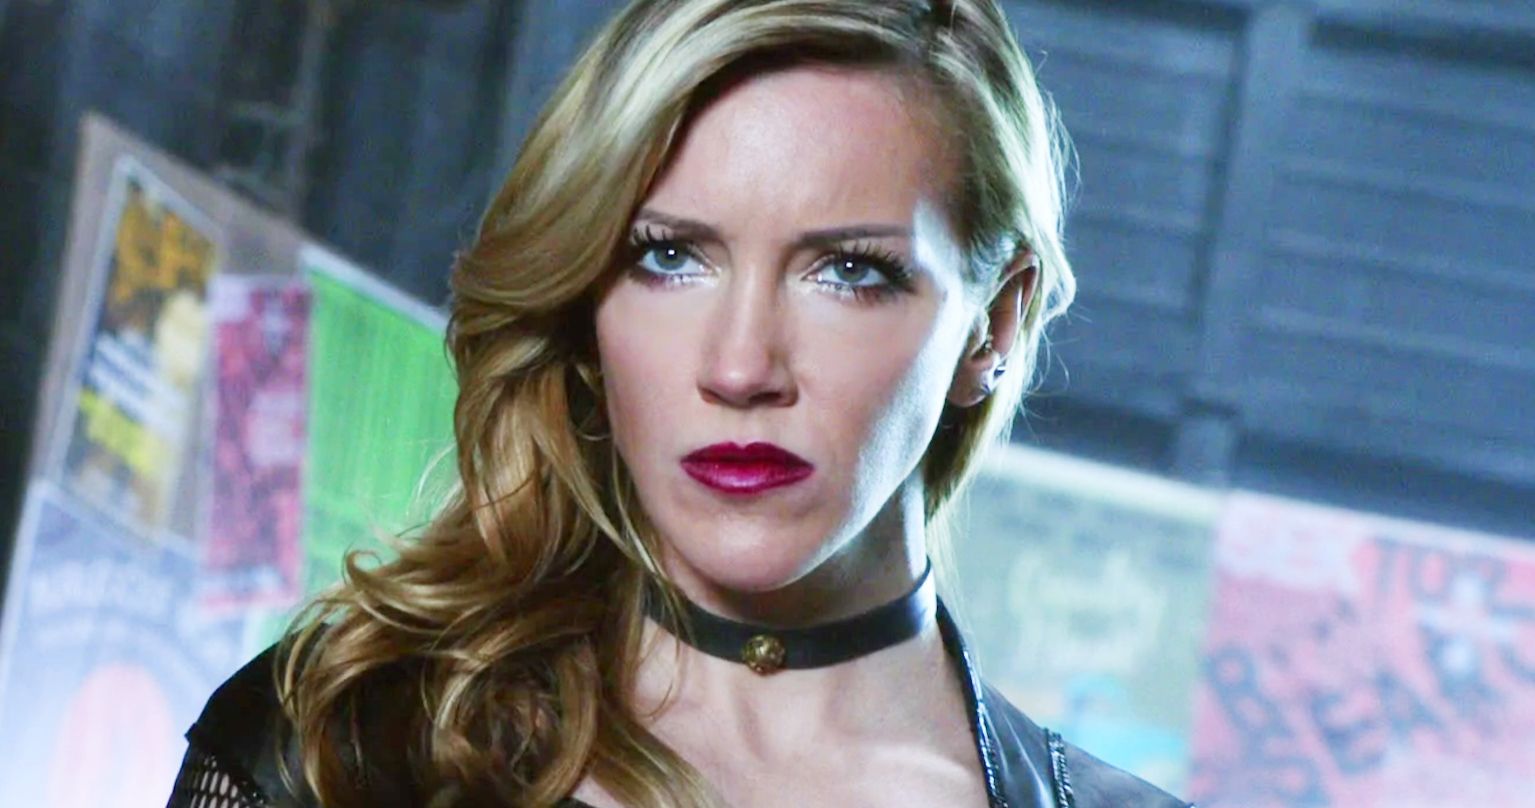 Arrow Star Katie Cassidy Auctions Off Her Nude Photos as NFTs Starting at $18K